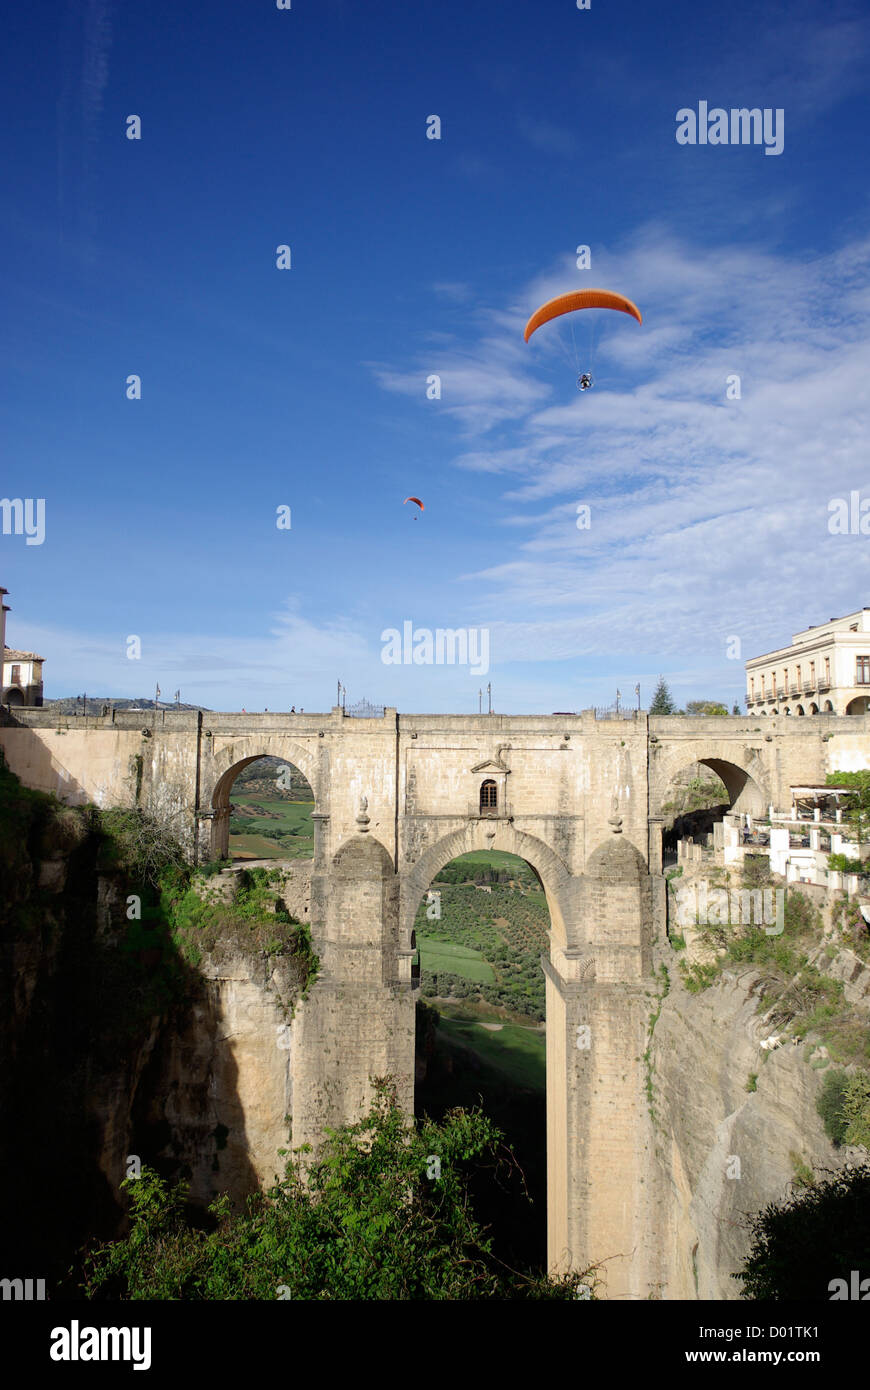 Powered parachutes / paragliders flying over the Puente Nuevo bridge in Ronda, Andalusia, Spain Stock Photo